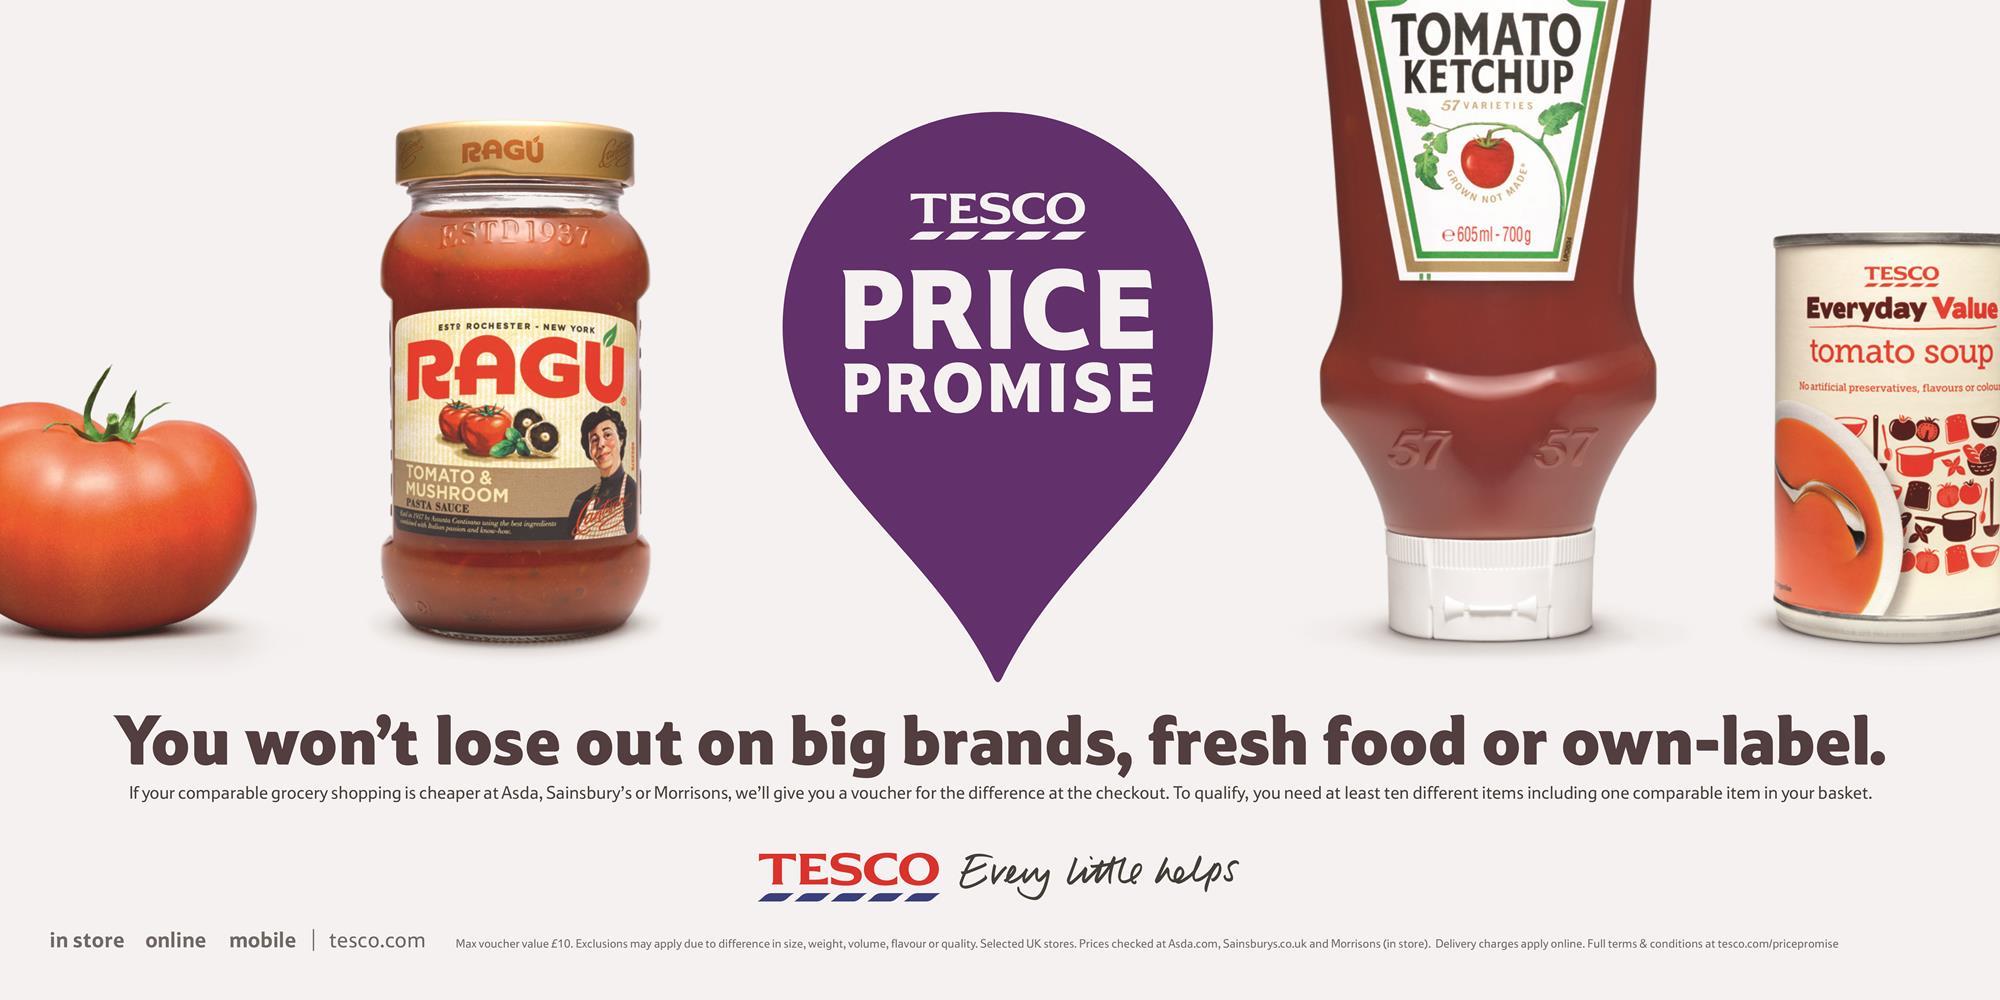 Sainsbury's considers appeal over Tesco Price Promise ads, News